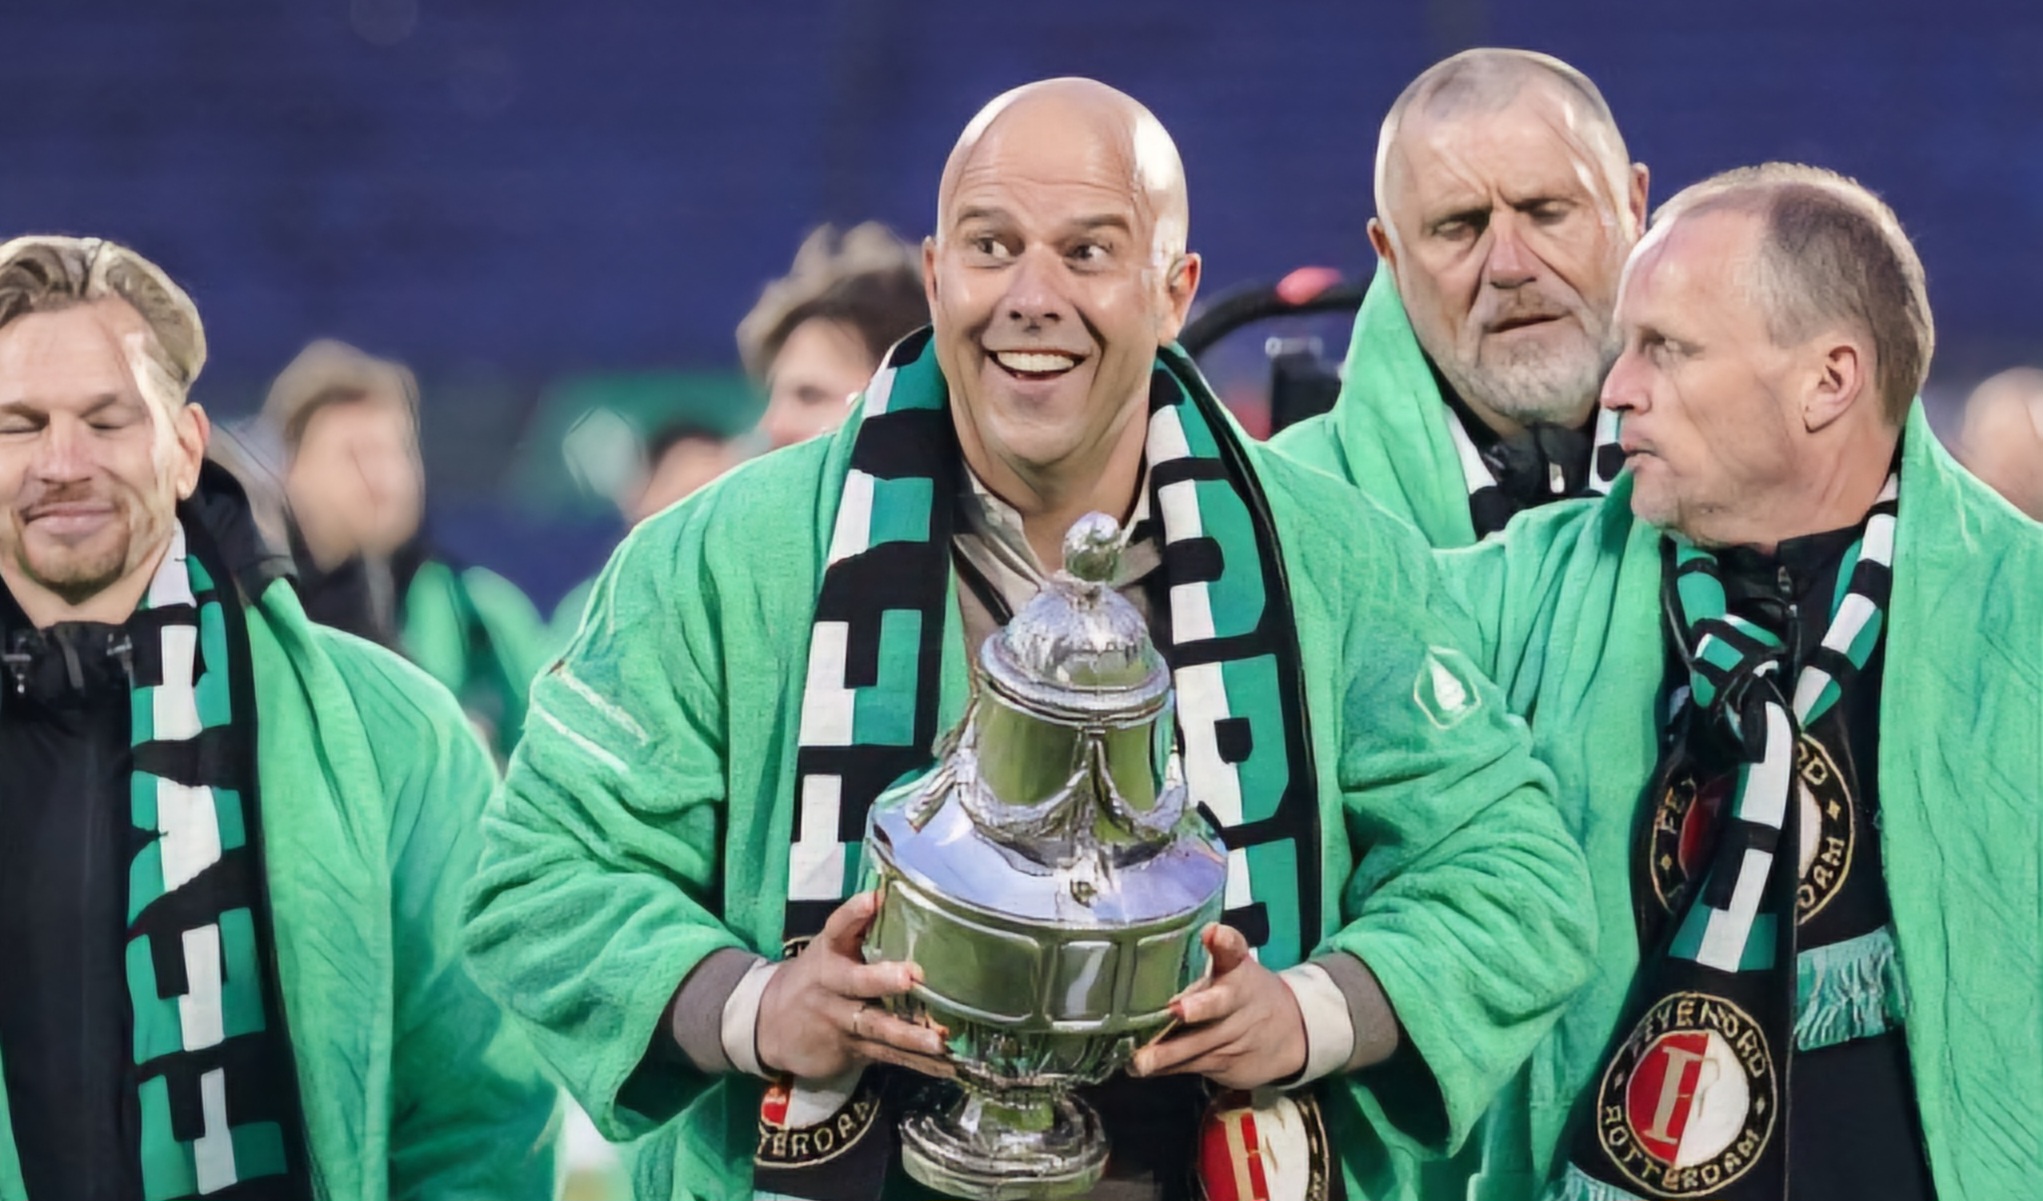 Arne Slot, the next Liverpool manager, celebrates winning the KNVB Cup with Feyenoord.